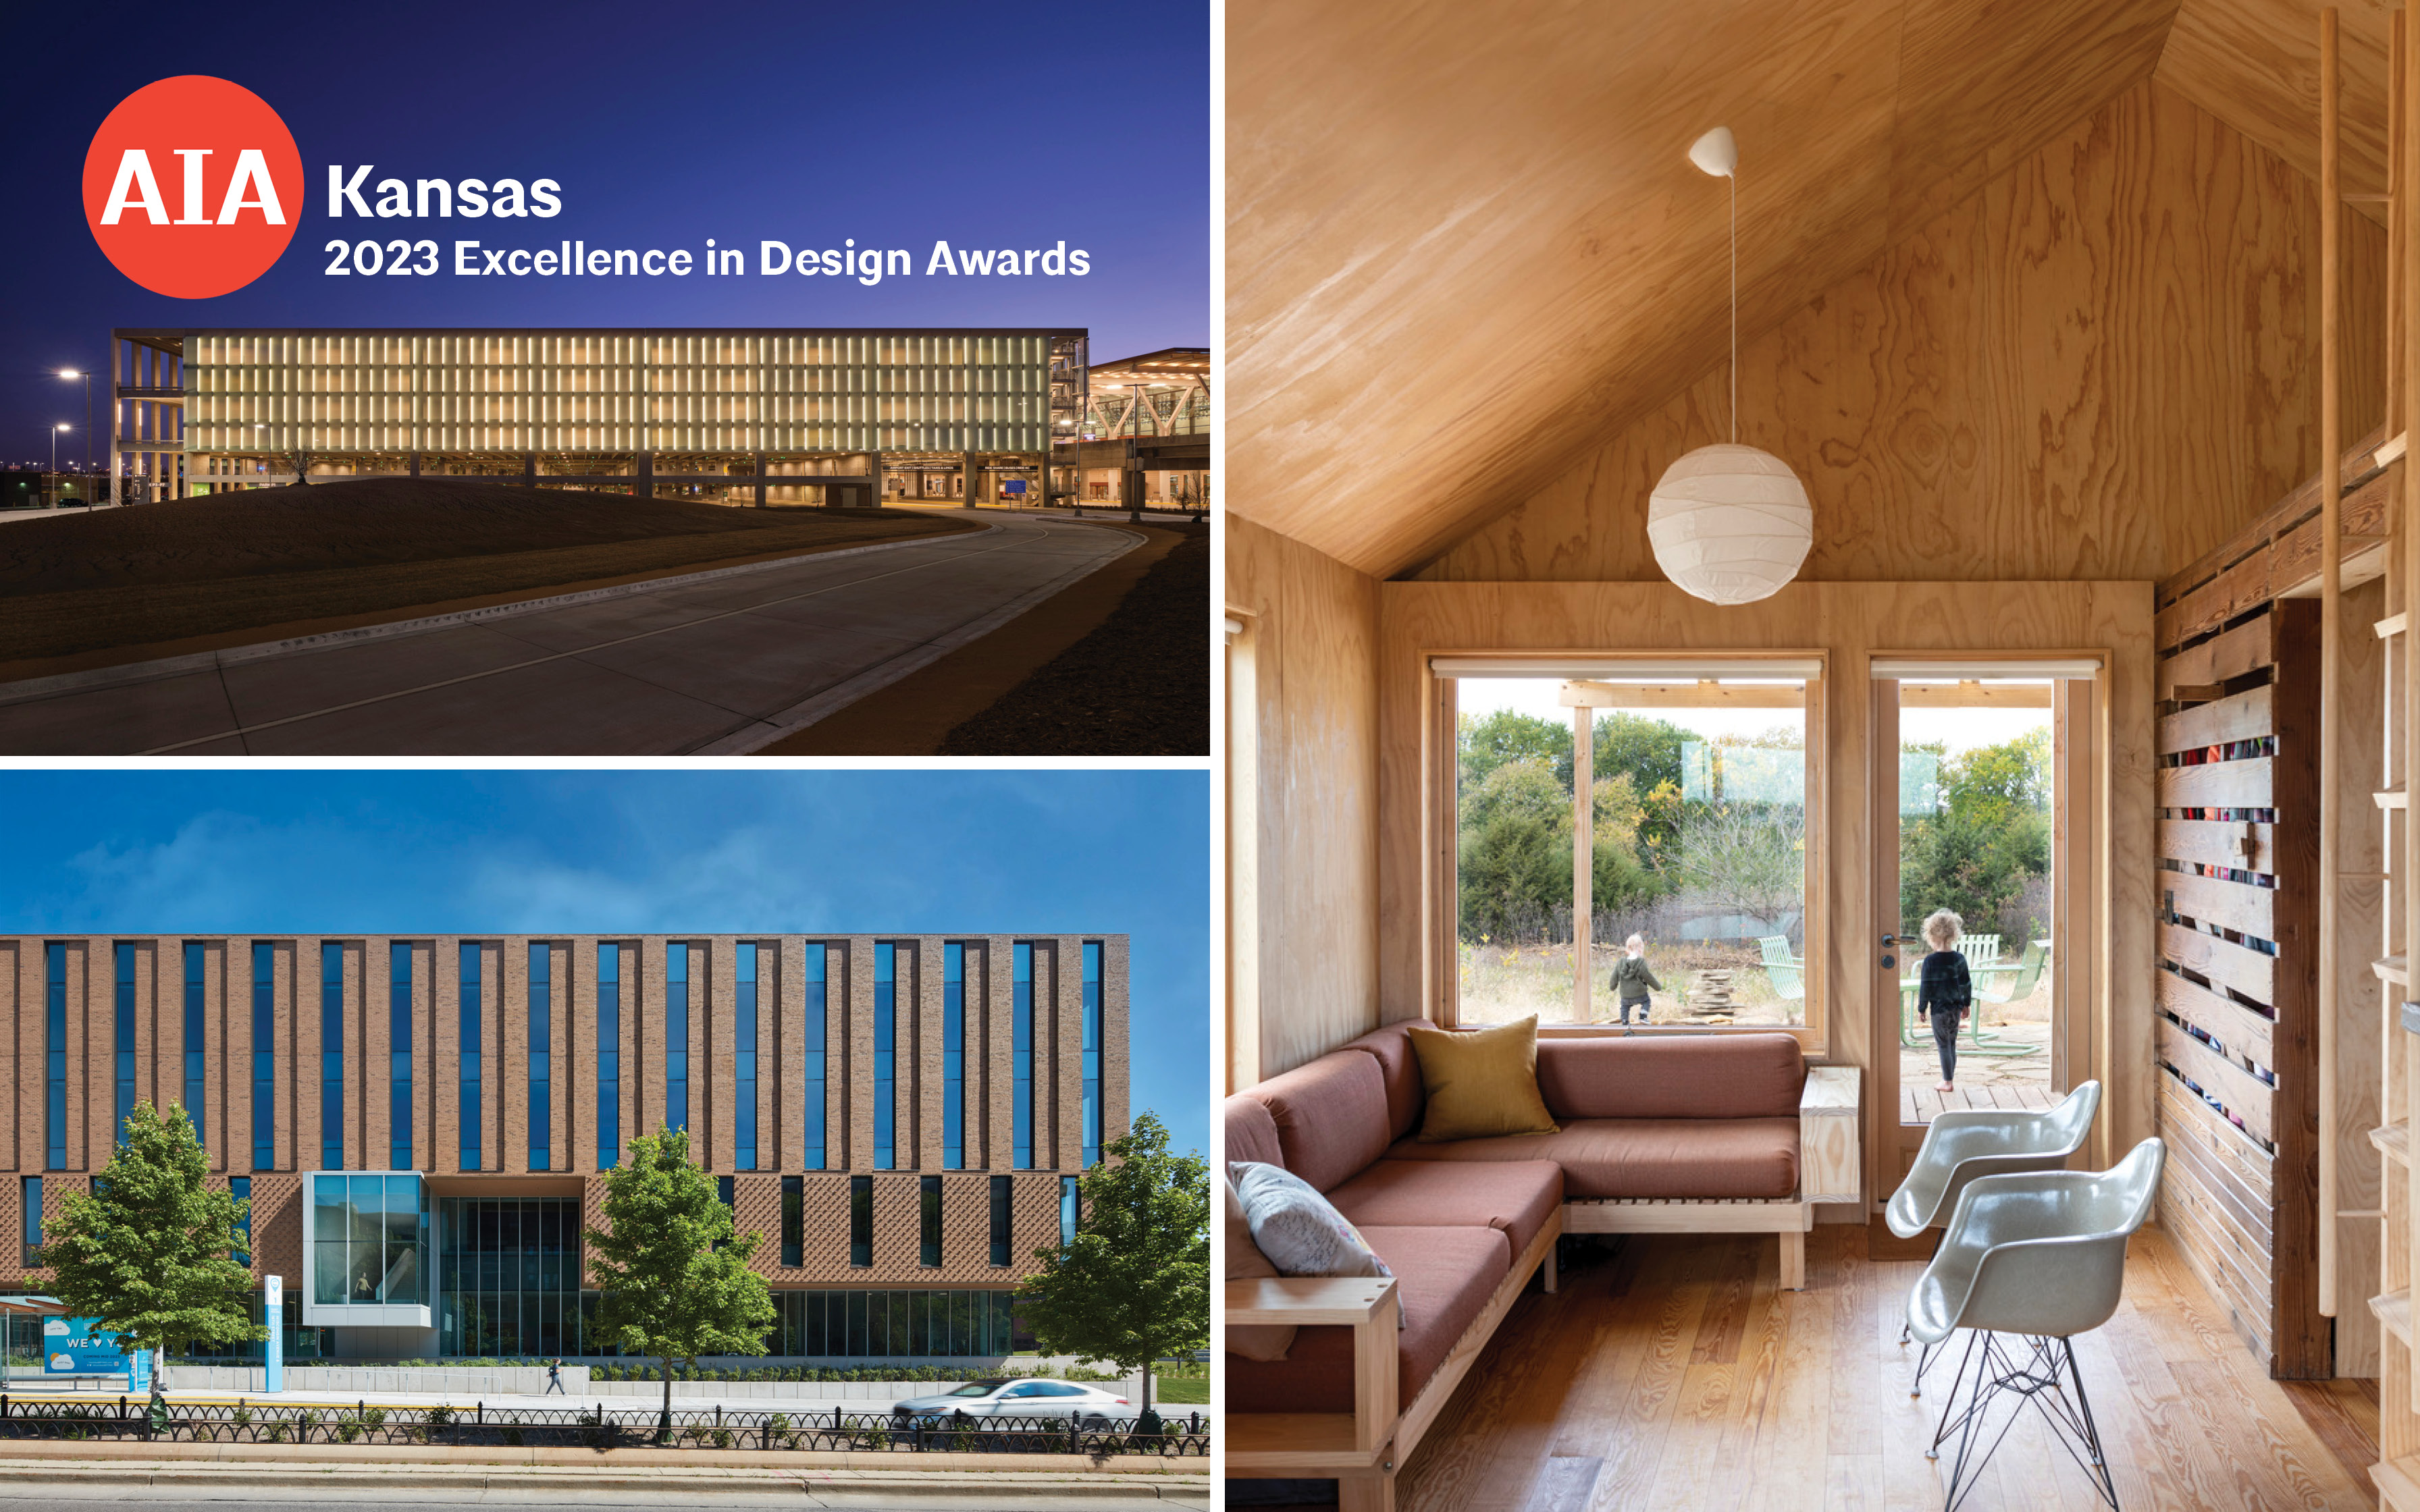 BNIM Projects recognized for elegance in design, execution, and craft at 2023 AIA Kansas Design Excellence Awards